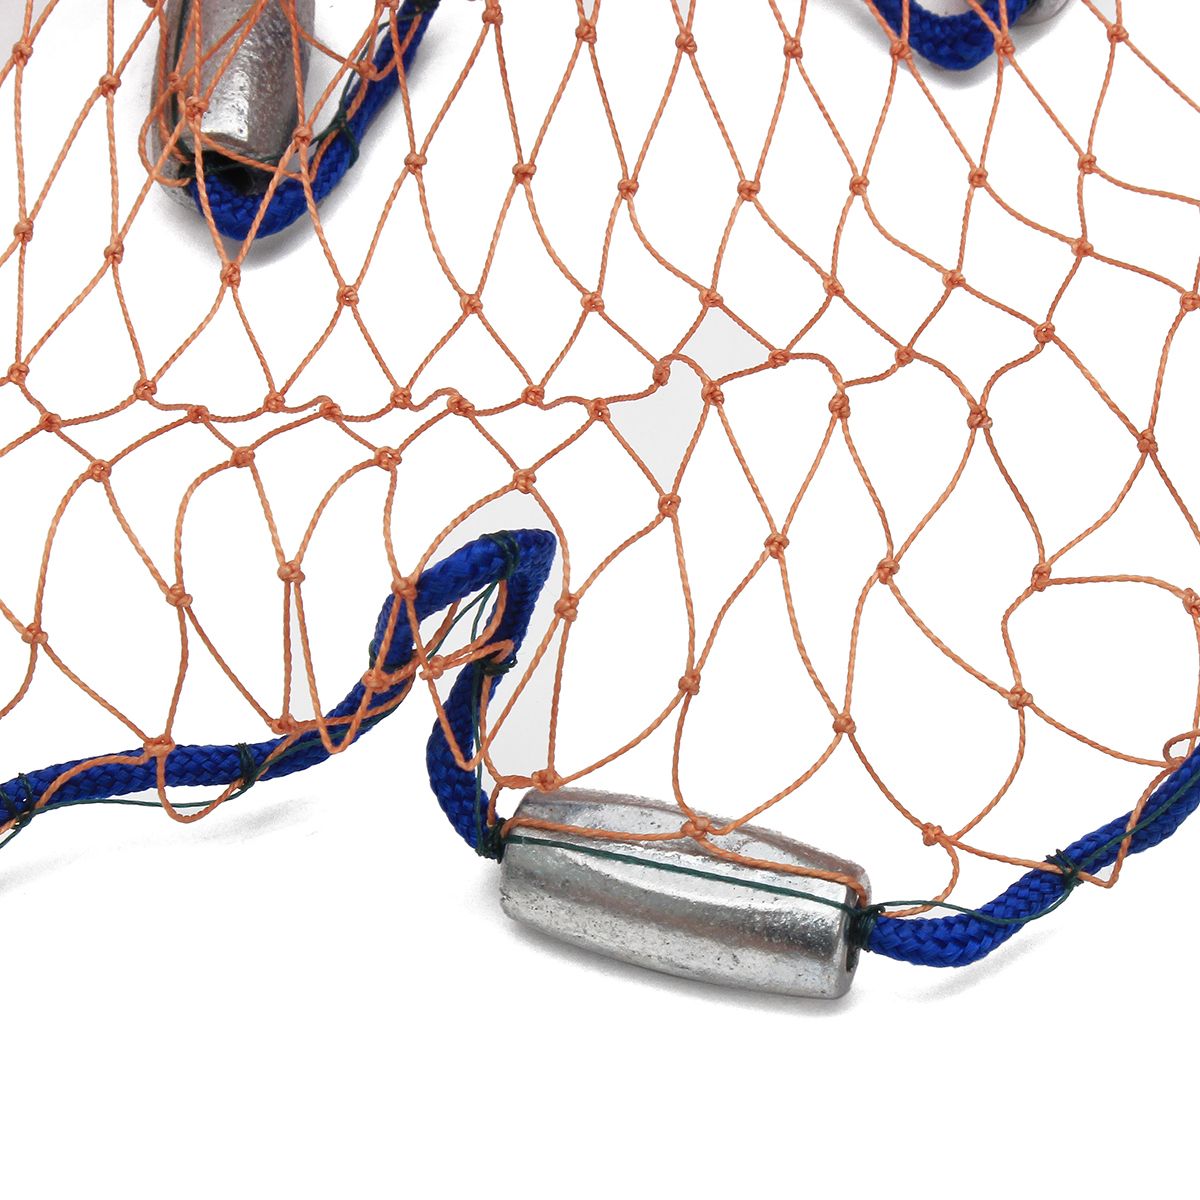 48M-Cast-Fishing-Net-Saltwater-Bait-Casting-Strong-Nylon-Line-With-Sinker-8FT-Brown-1269480